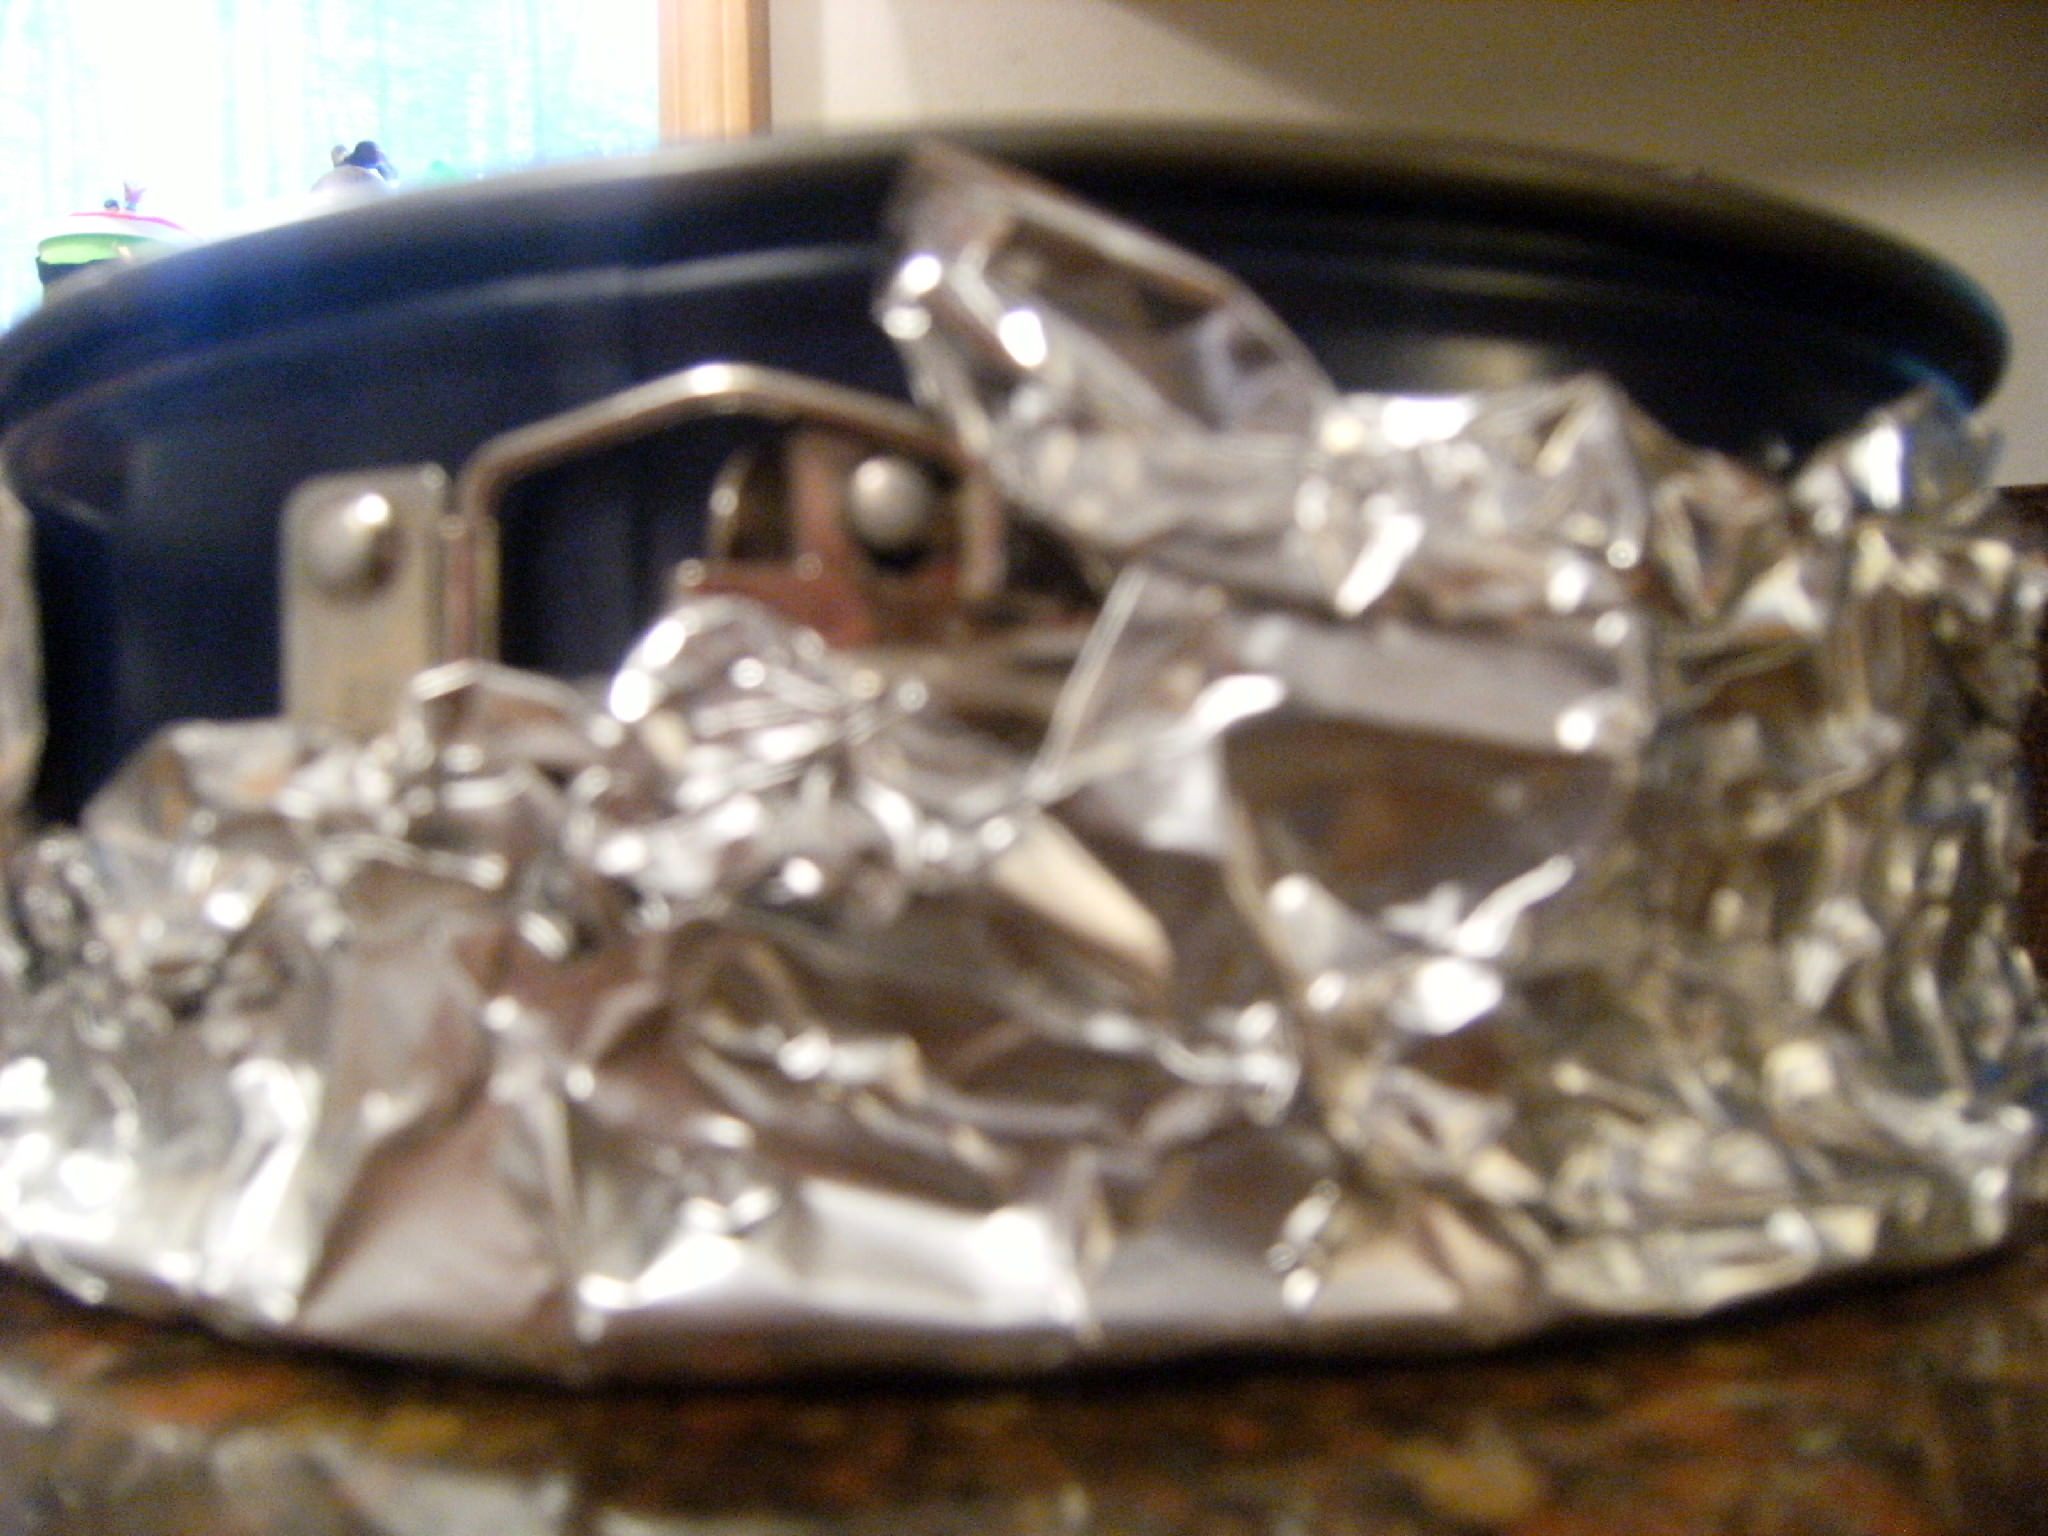 spring form pan, wrapped in aluminum foil